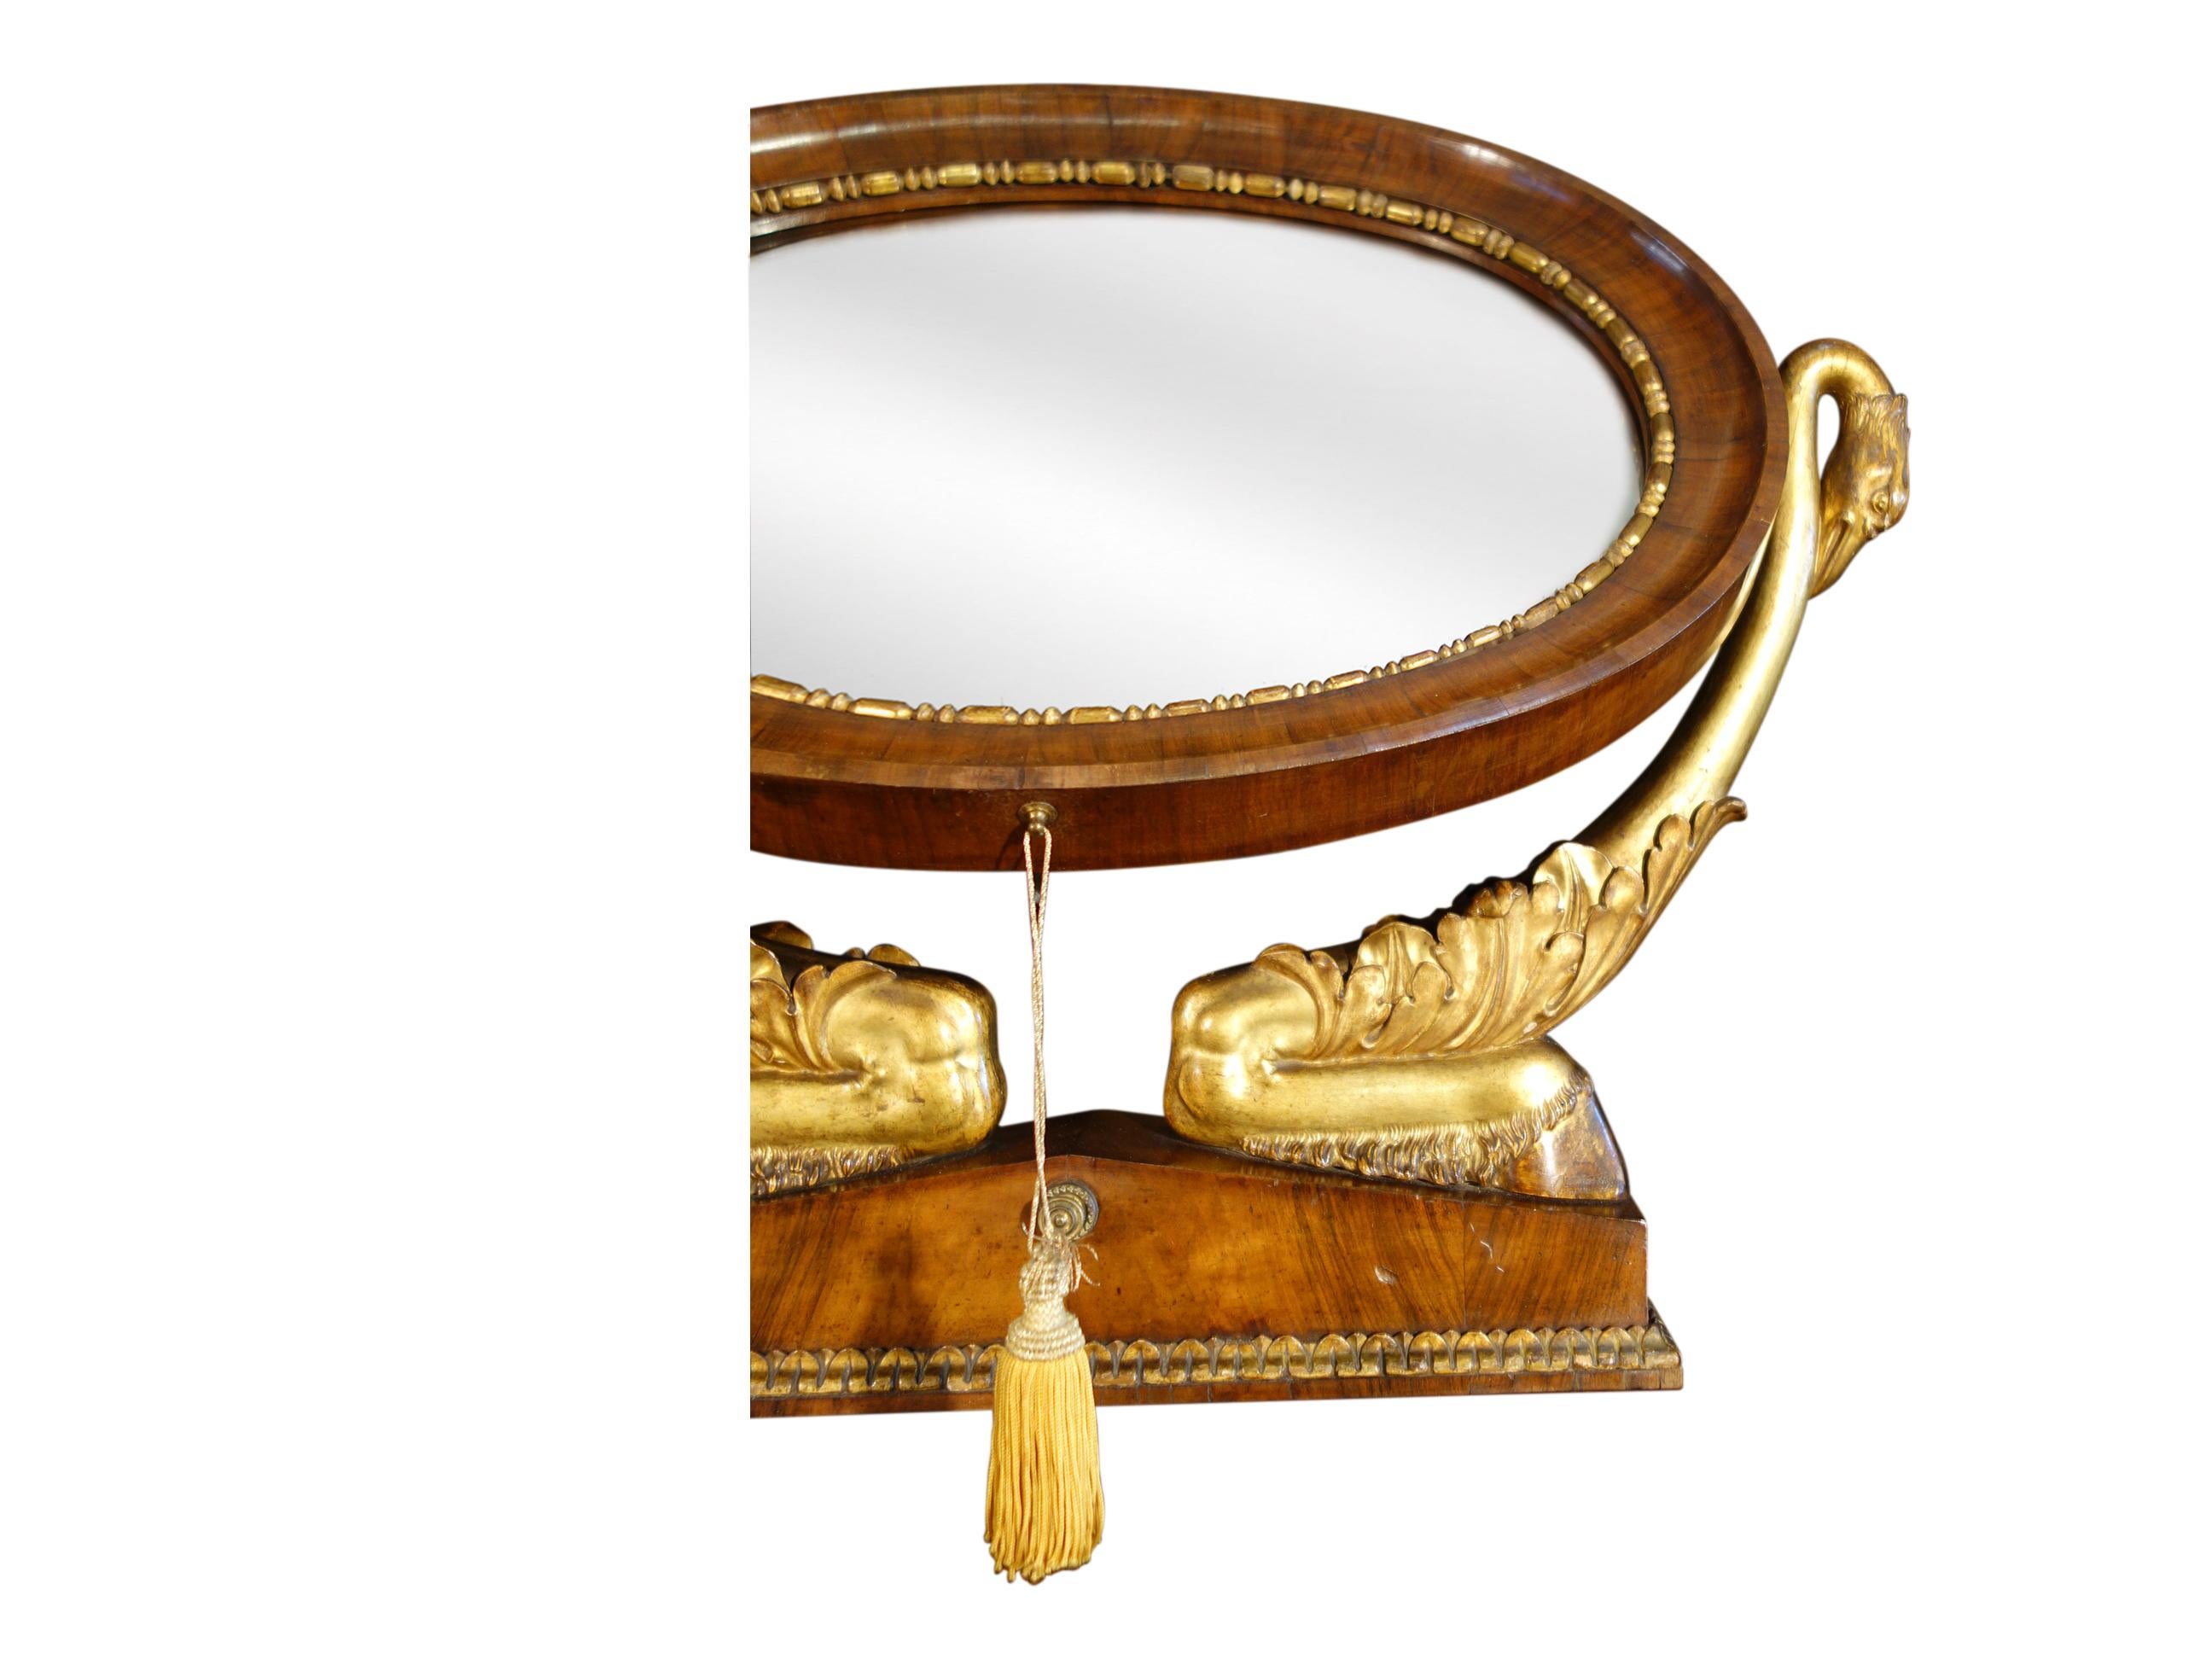 19th Century Italian Empire Walnut Psyche Table Mirror with Gold Gilt Swans and Ebony Inlay For Sale